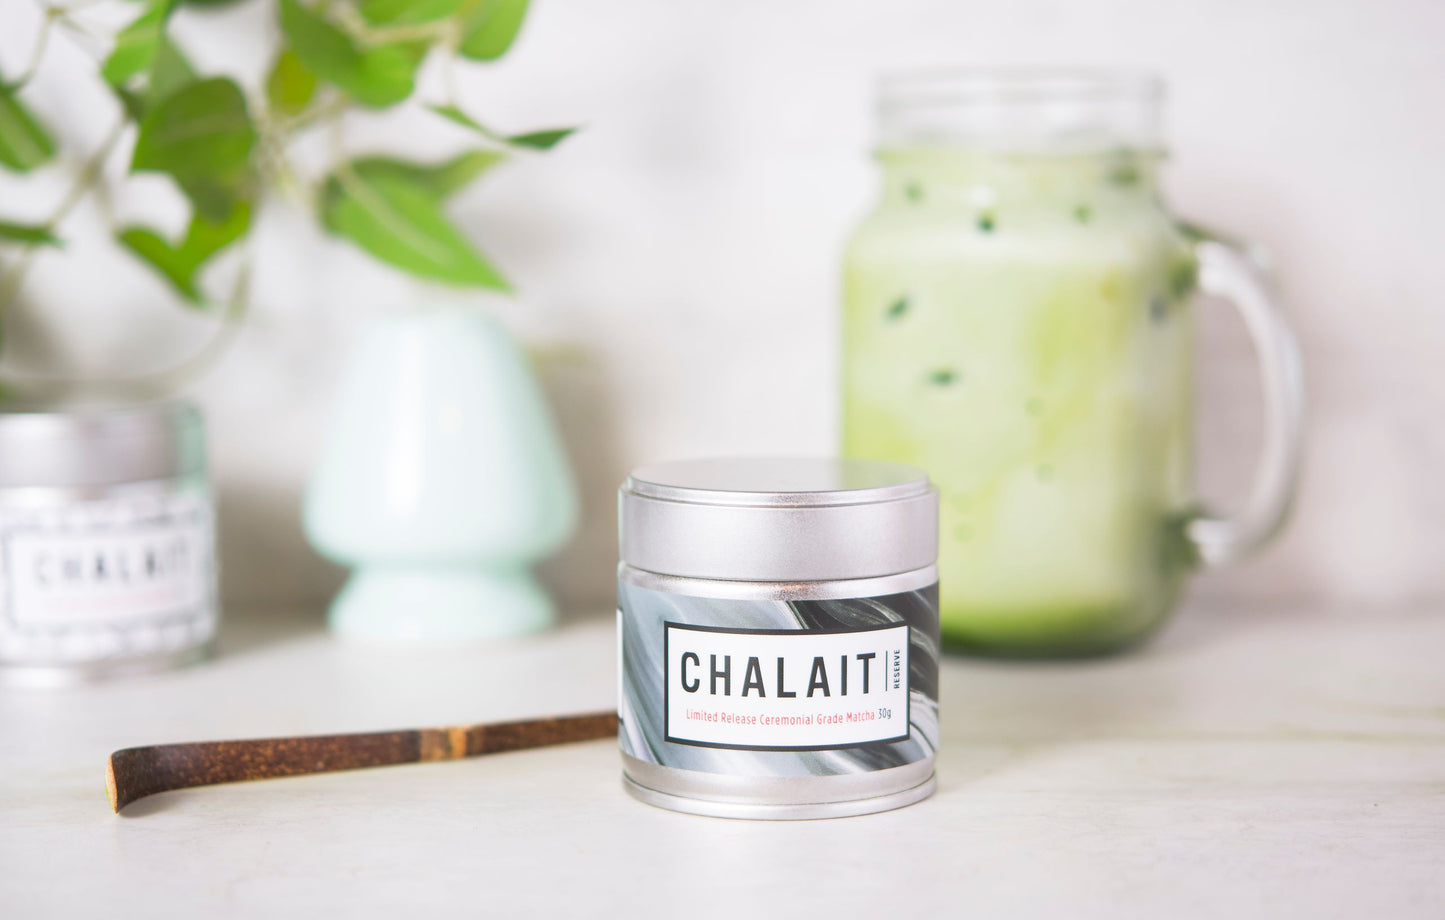 Limited Release Ceremonial Grade Matcha